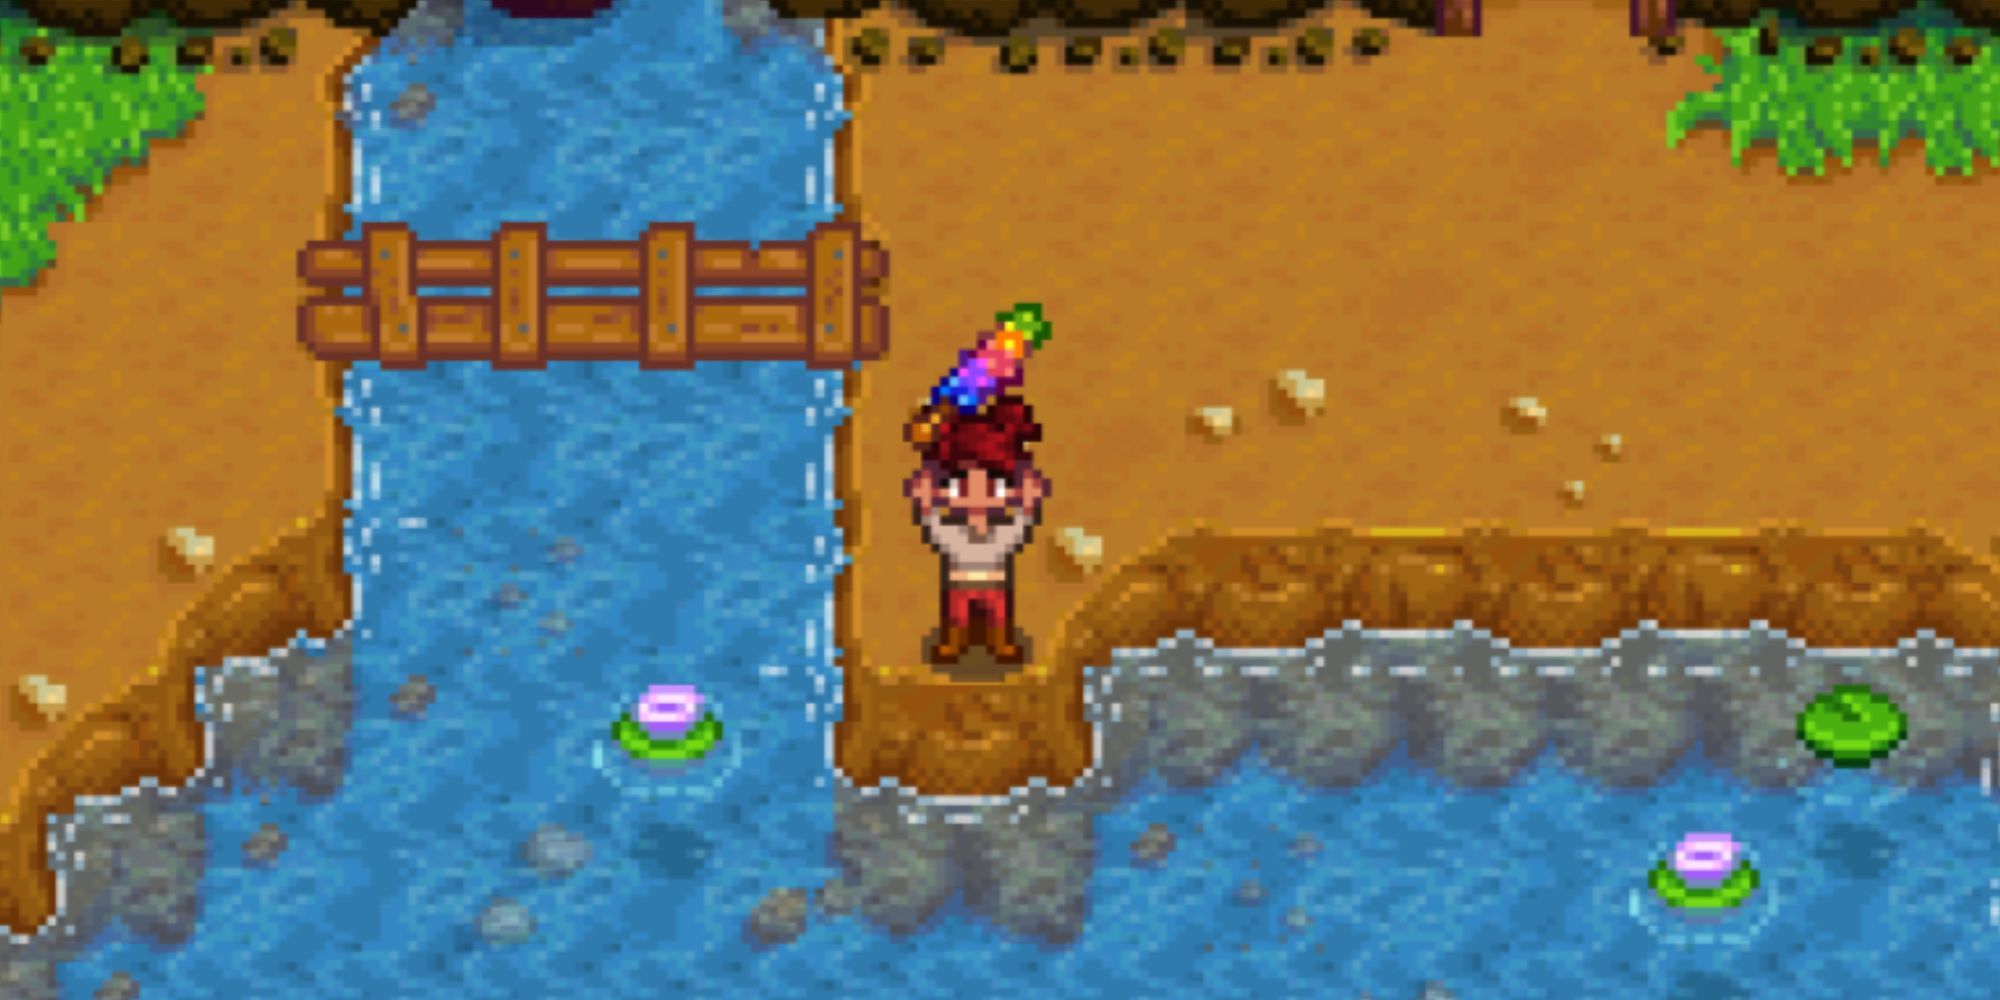 Player holding a Magic Rock Candy in Stardew Valley outside the mines in Pelican Town